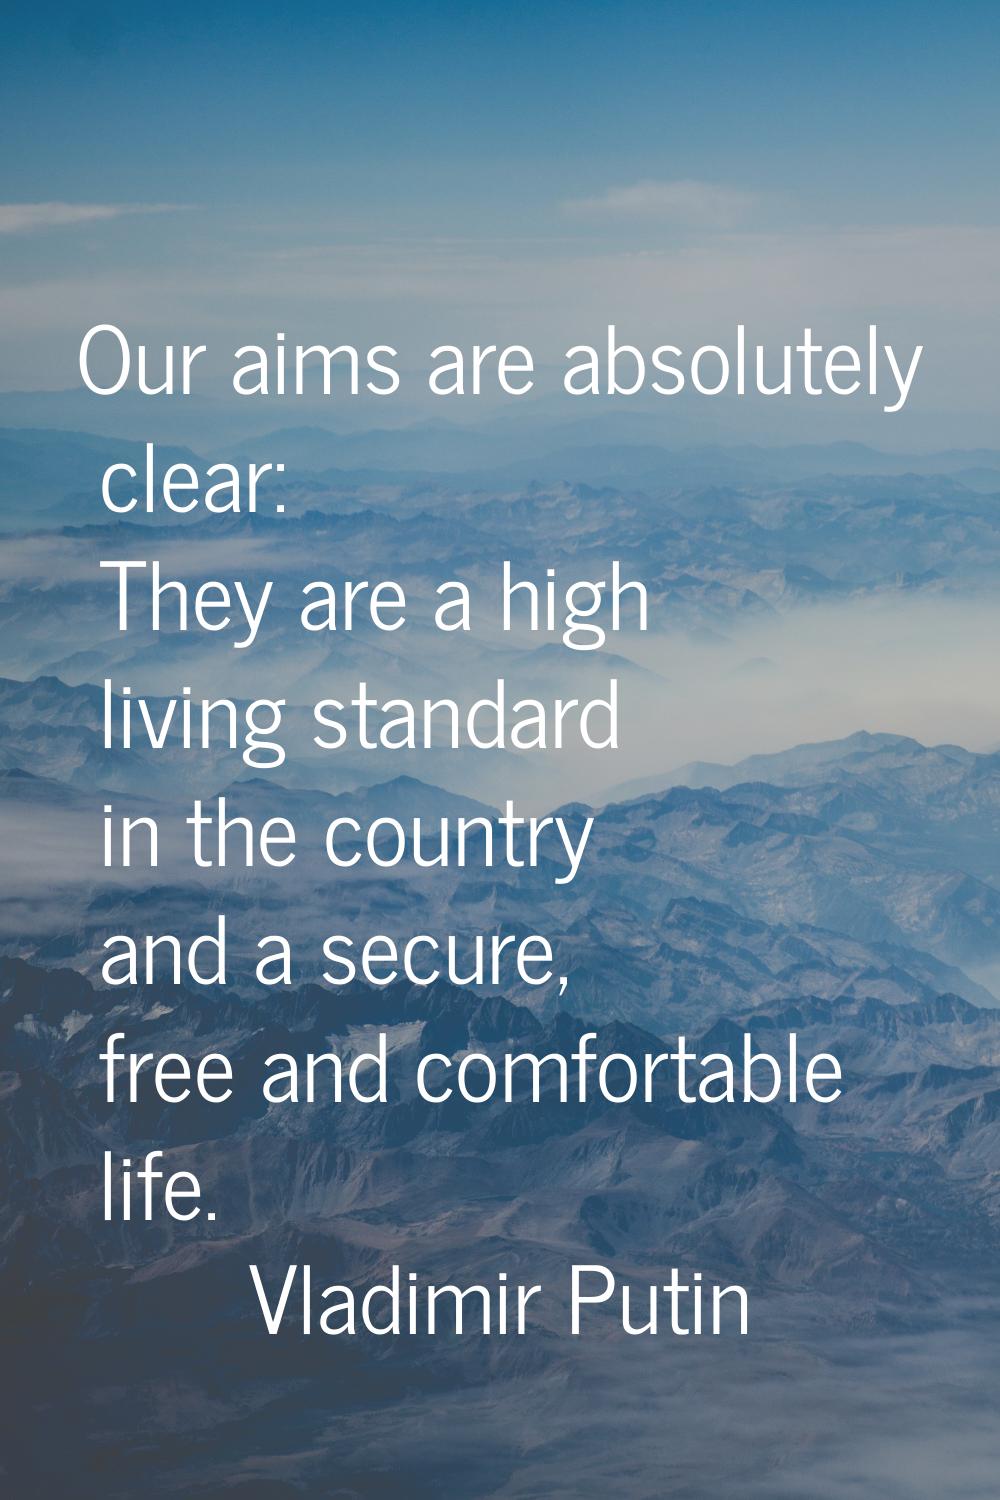 Our aims are absolutely clear: They are a high living standard in the country and a secure, free an